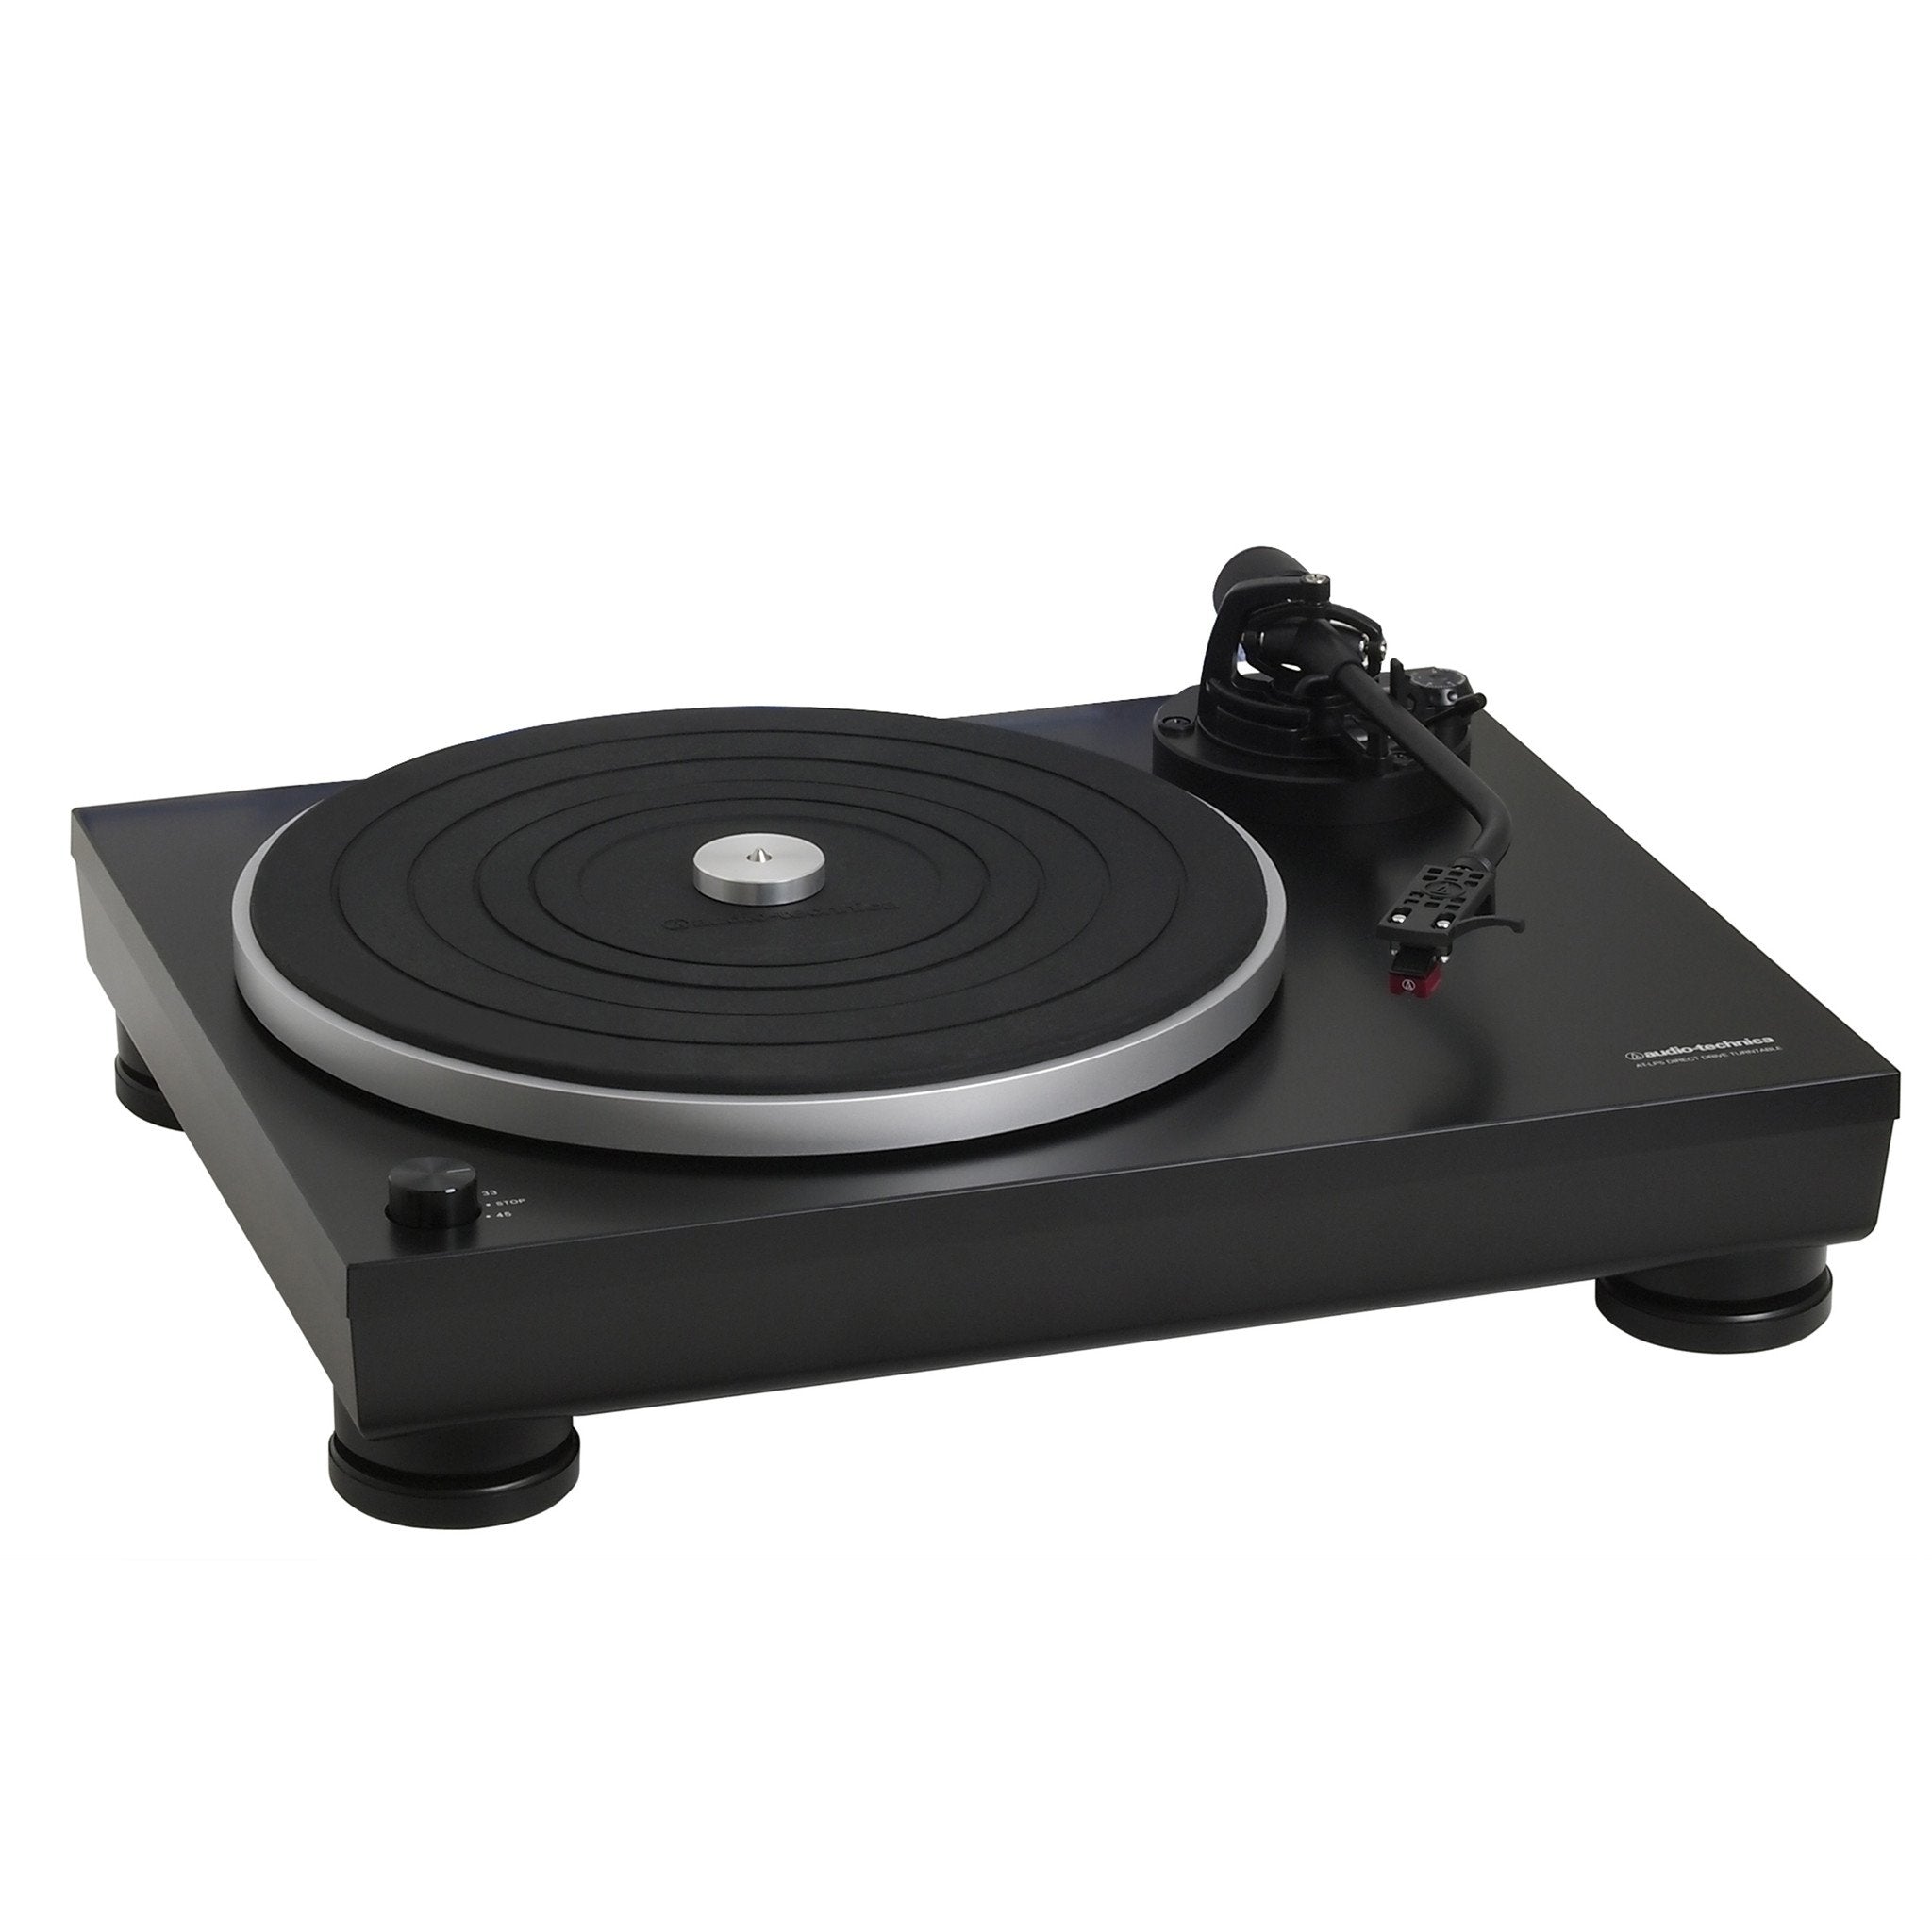 Audio-Technica: AT-LP5 Direct Drive USB Turntable